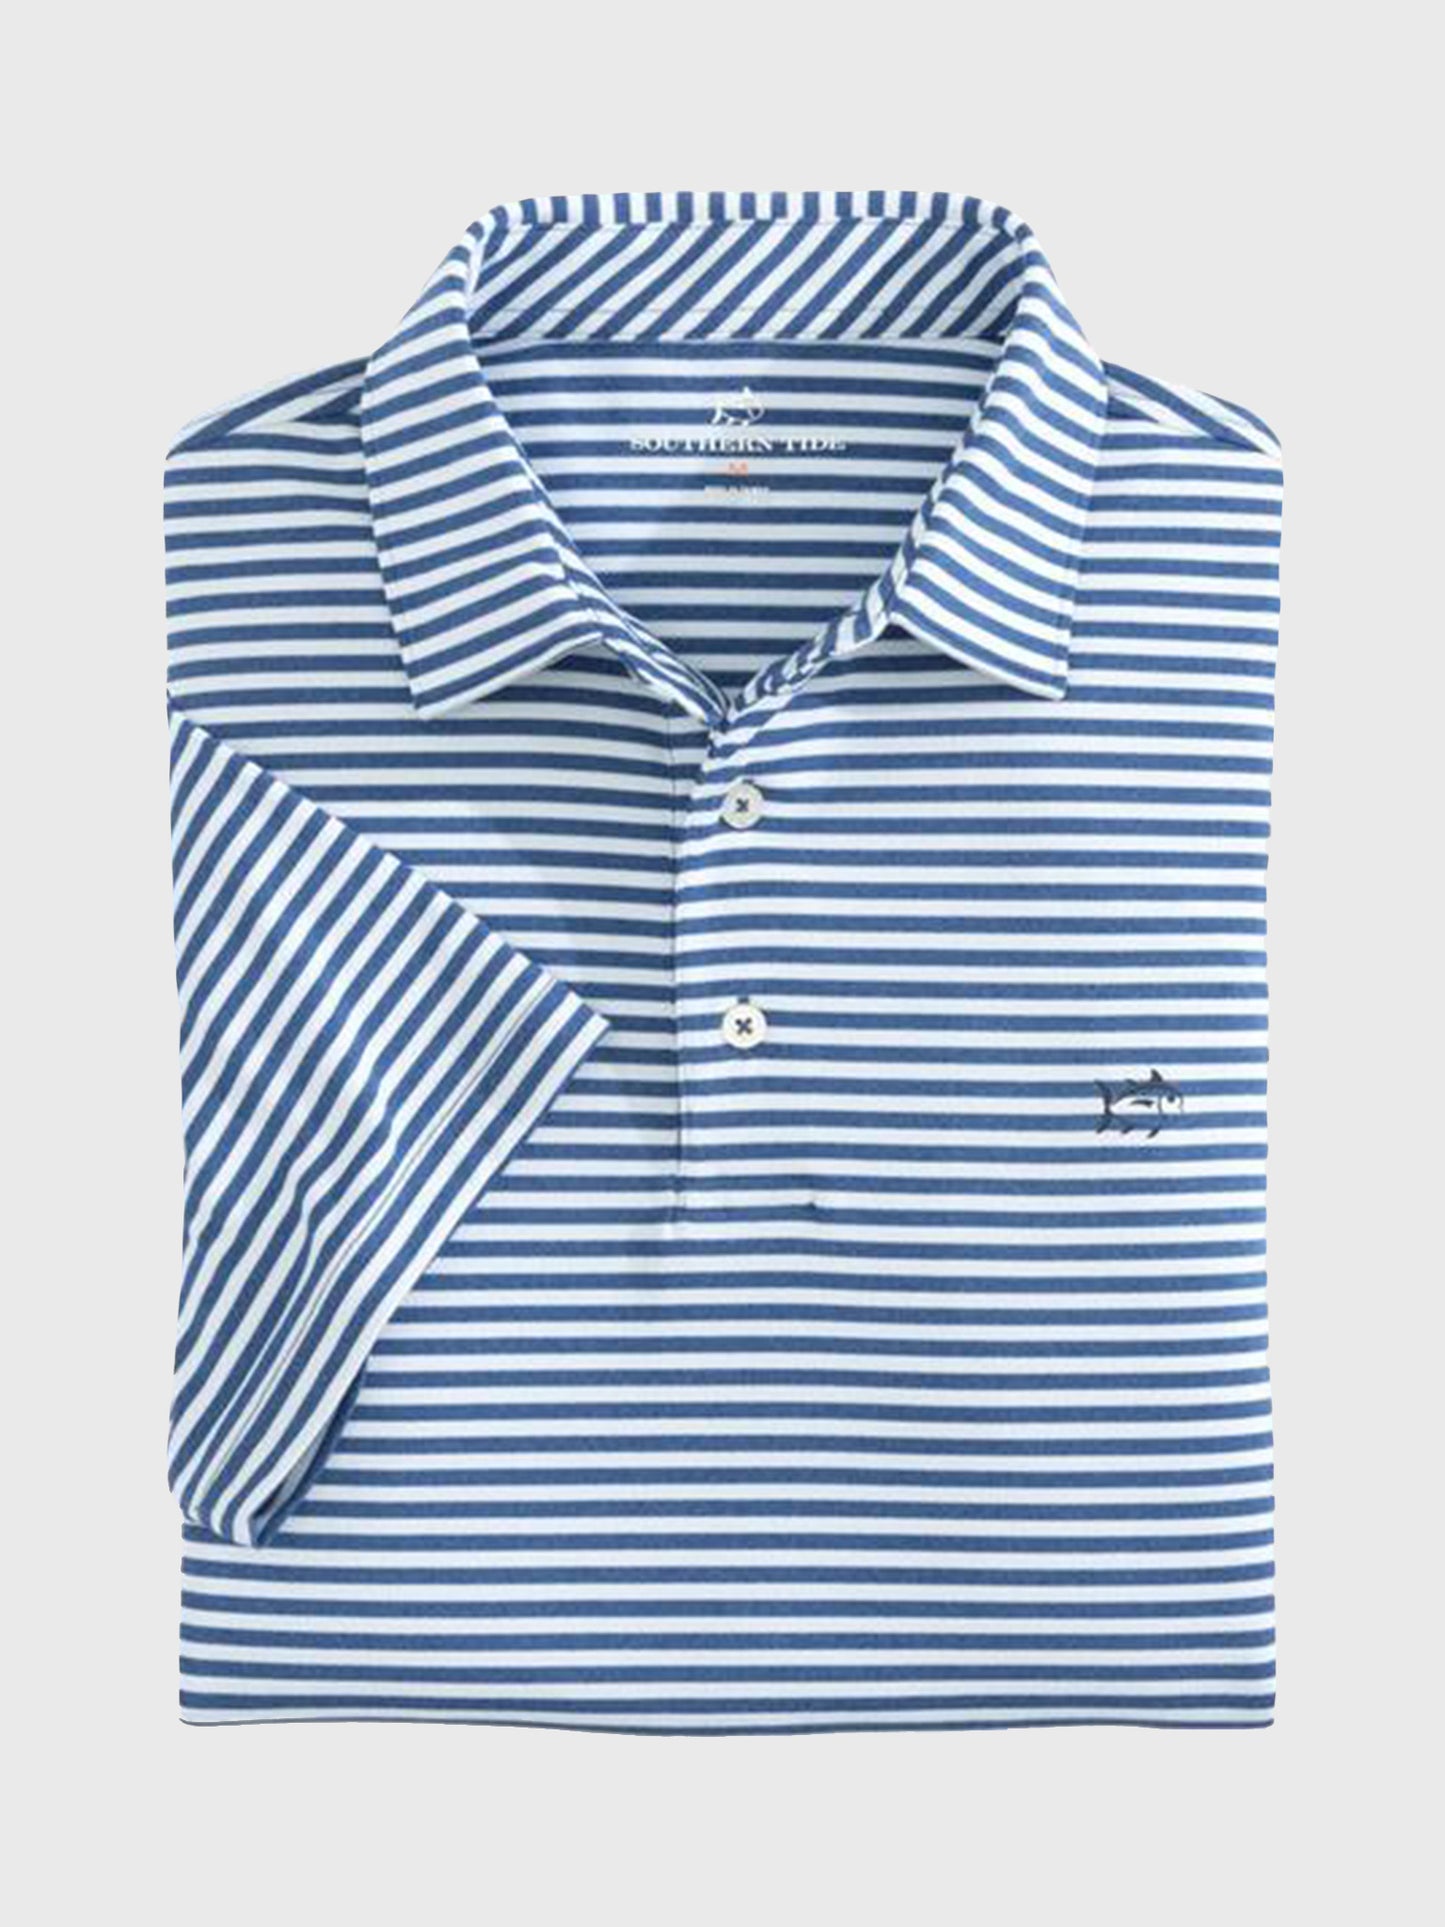 Southern Tide Men's Ryder Heathered Striped Performance Polo Shirt